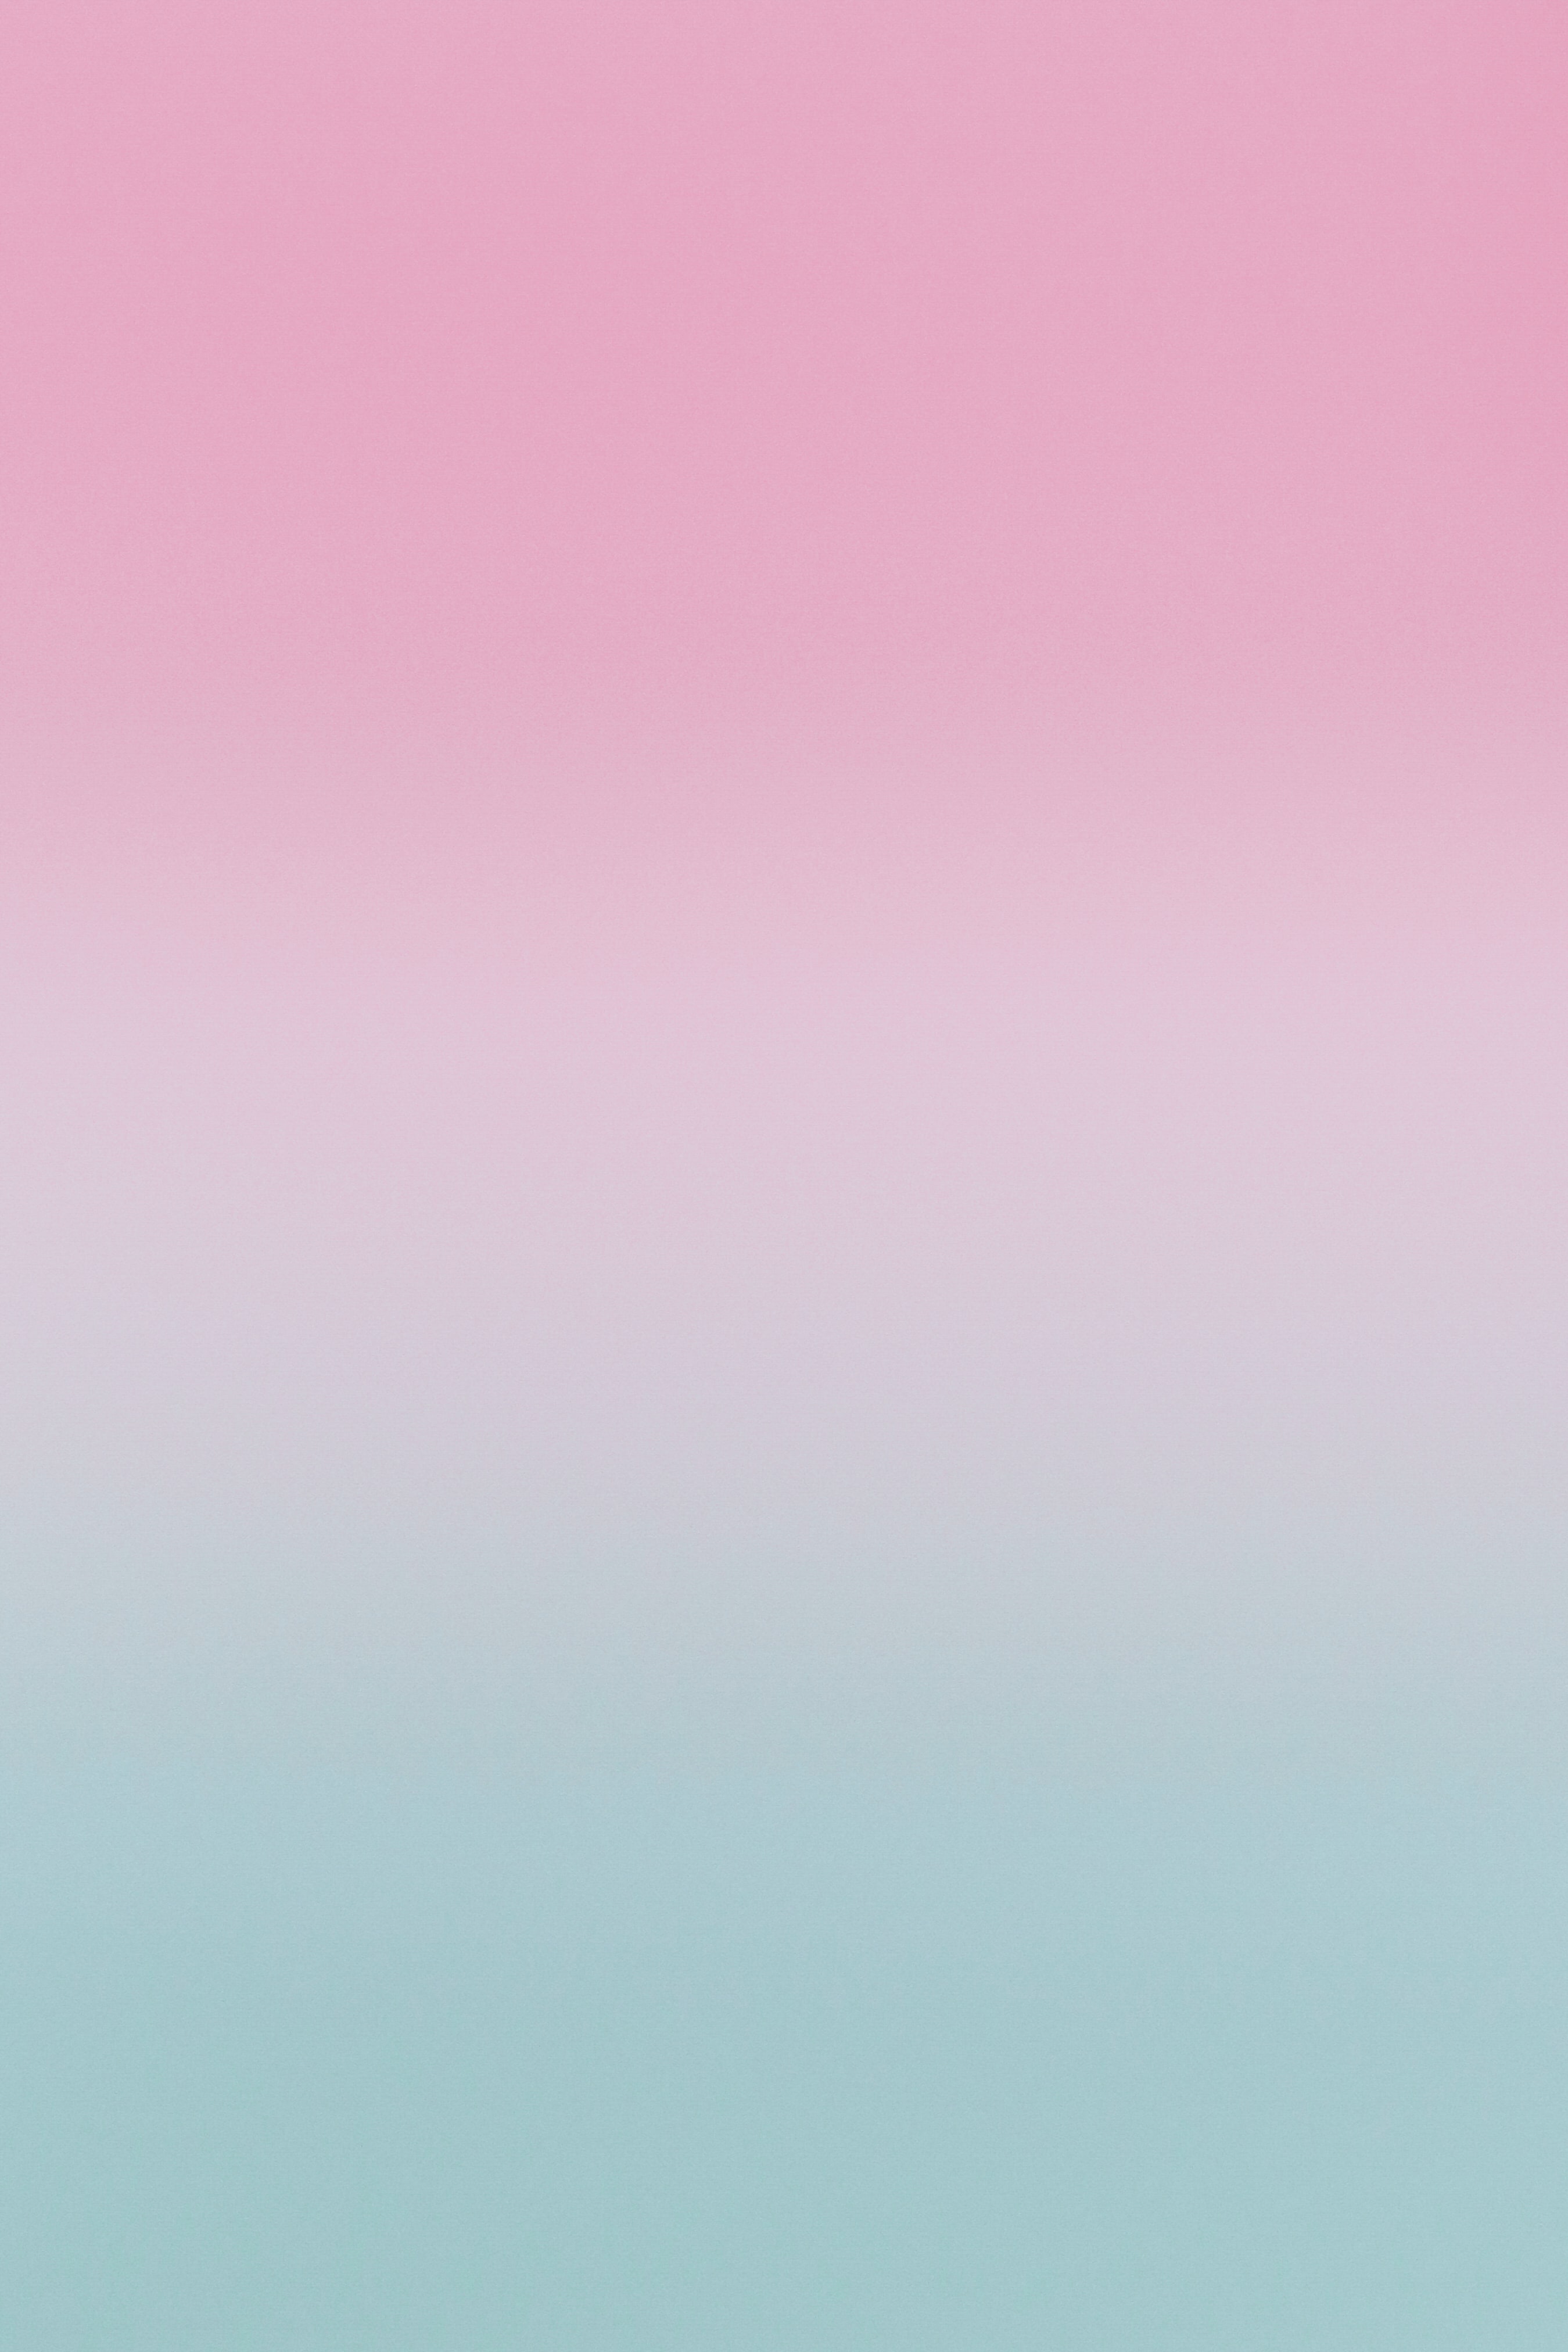 blur, pink, gradient, blue, abstract, smooth HD wallpaper